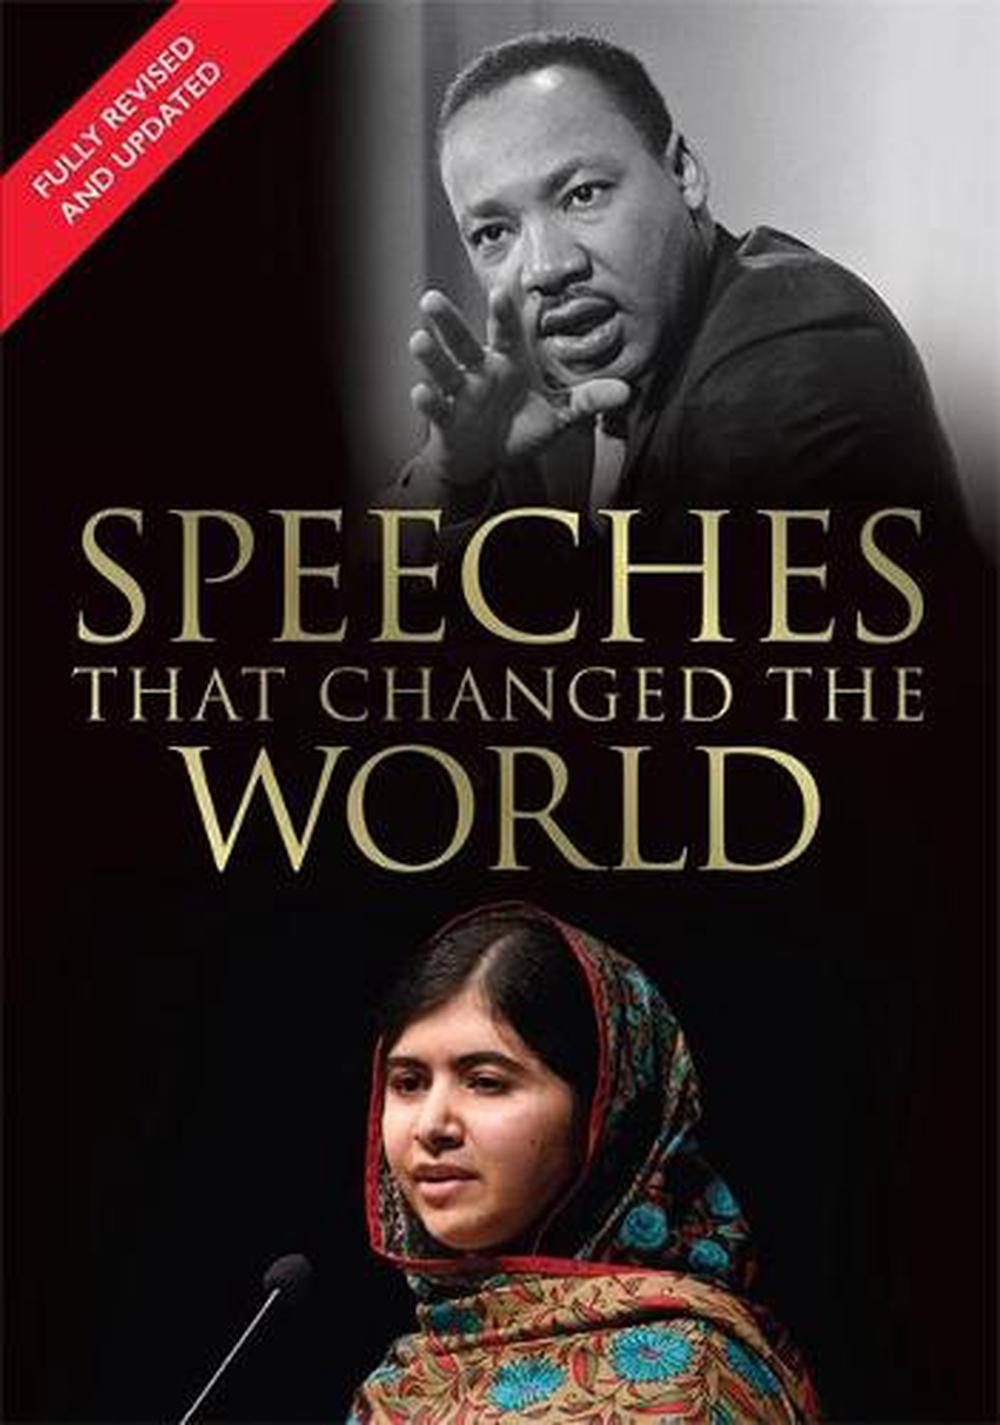 what are speeches that changed the world